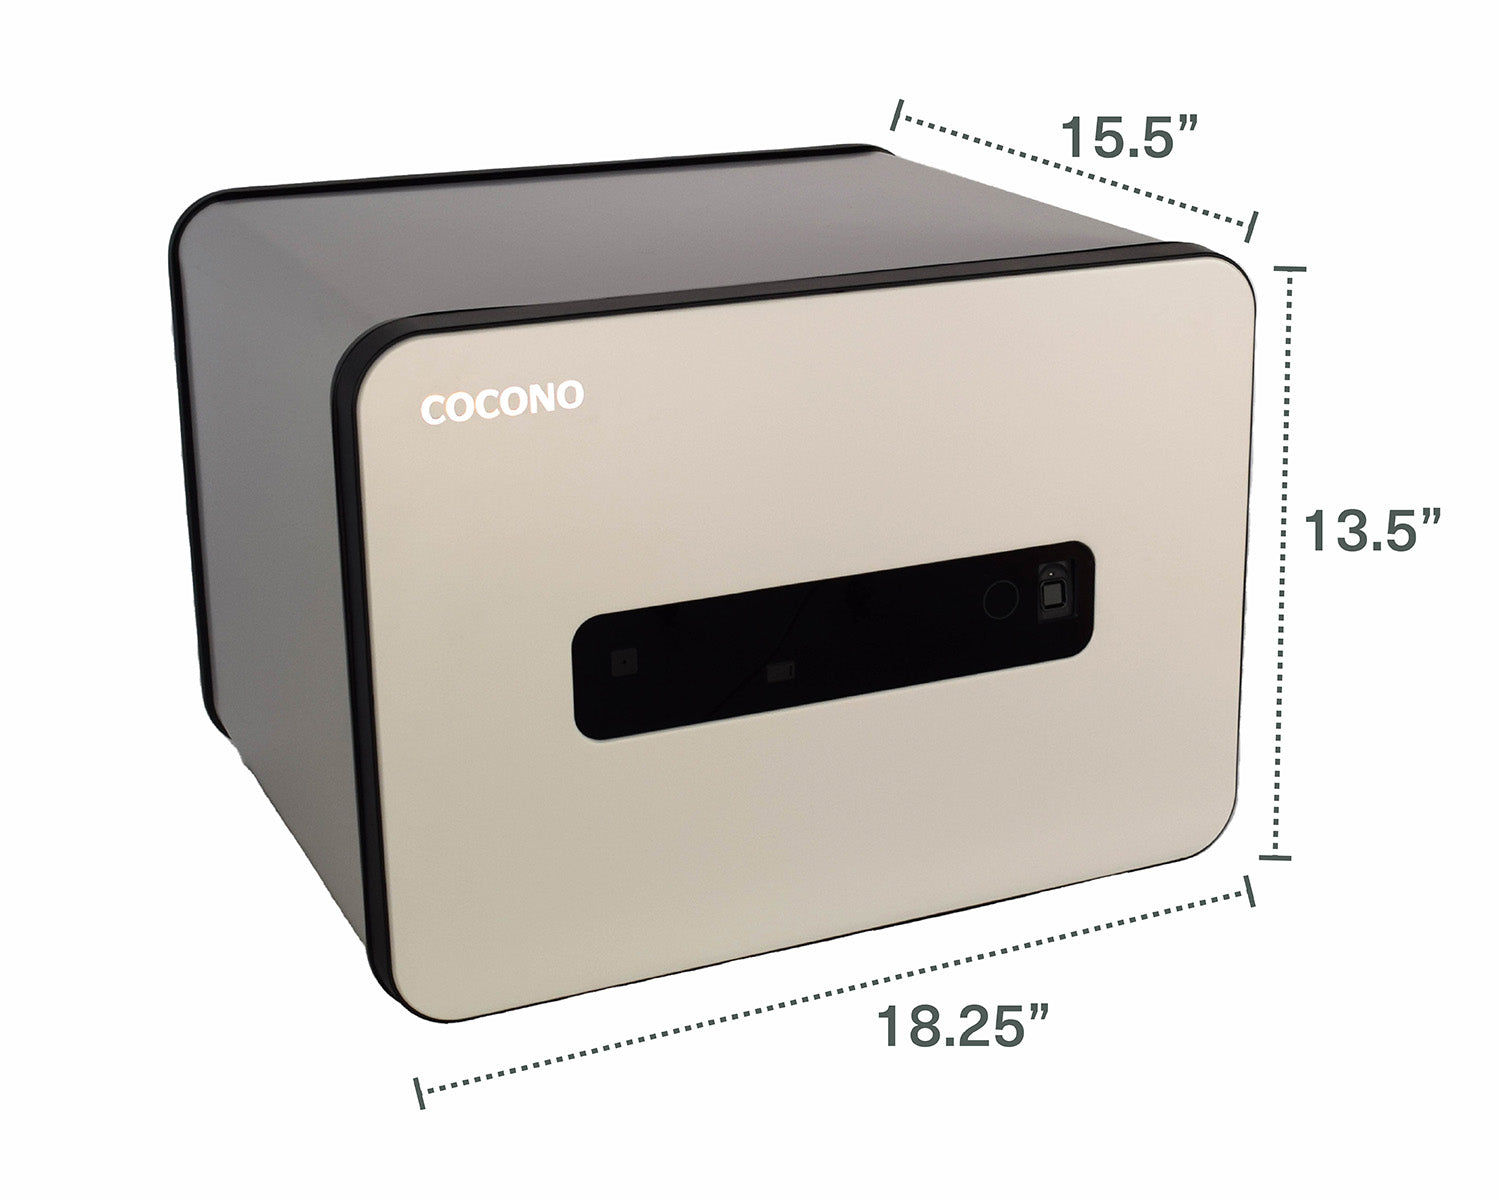 Photo of the exterior of a Cocono 20 small safe for home showing dimensions: 15.5" x 13.5" x 18.25"